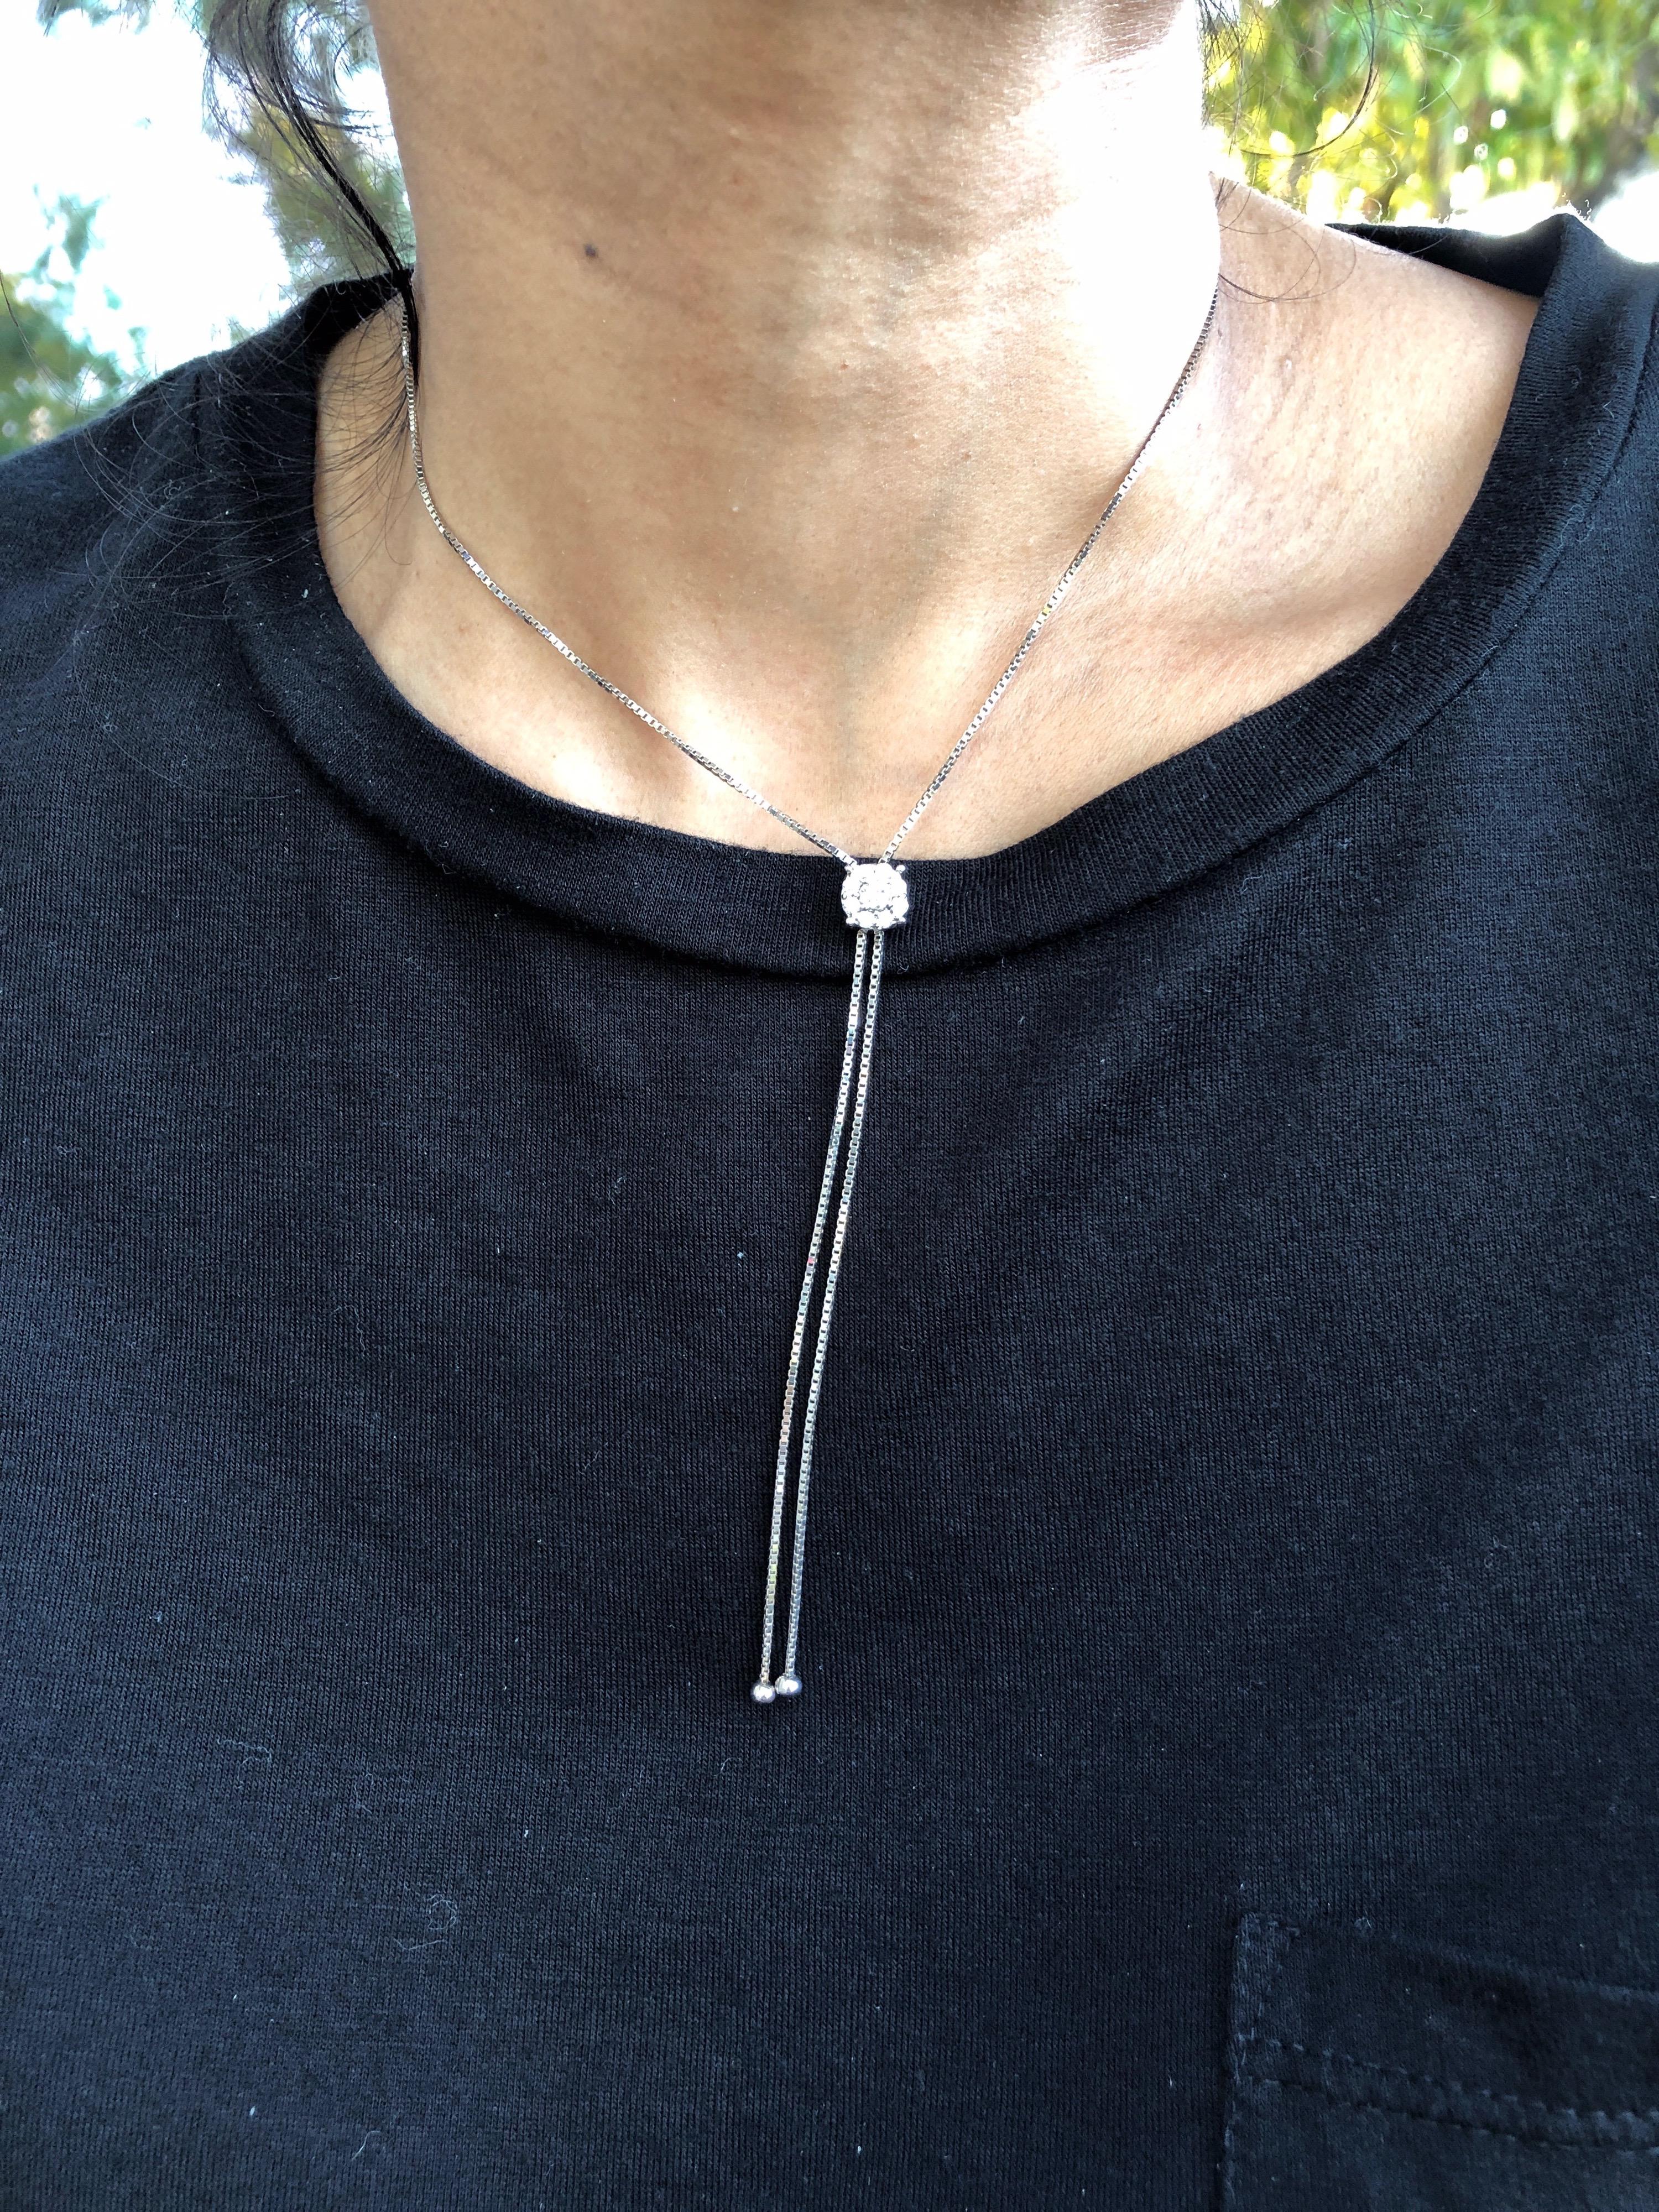 0.37 Carat Diamond Lariat Style Necklace in 14 Karat White Gold In New Condition For Sale In Los Angeles, CA